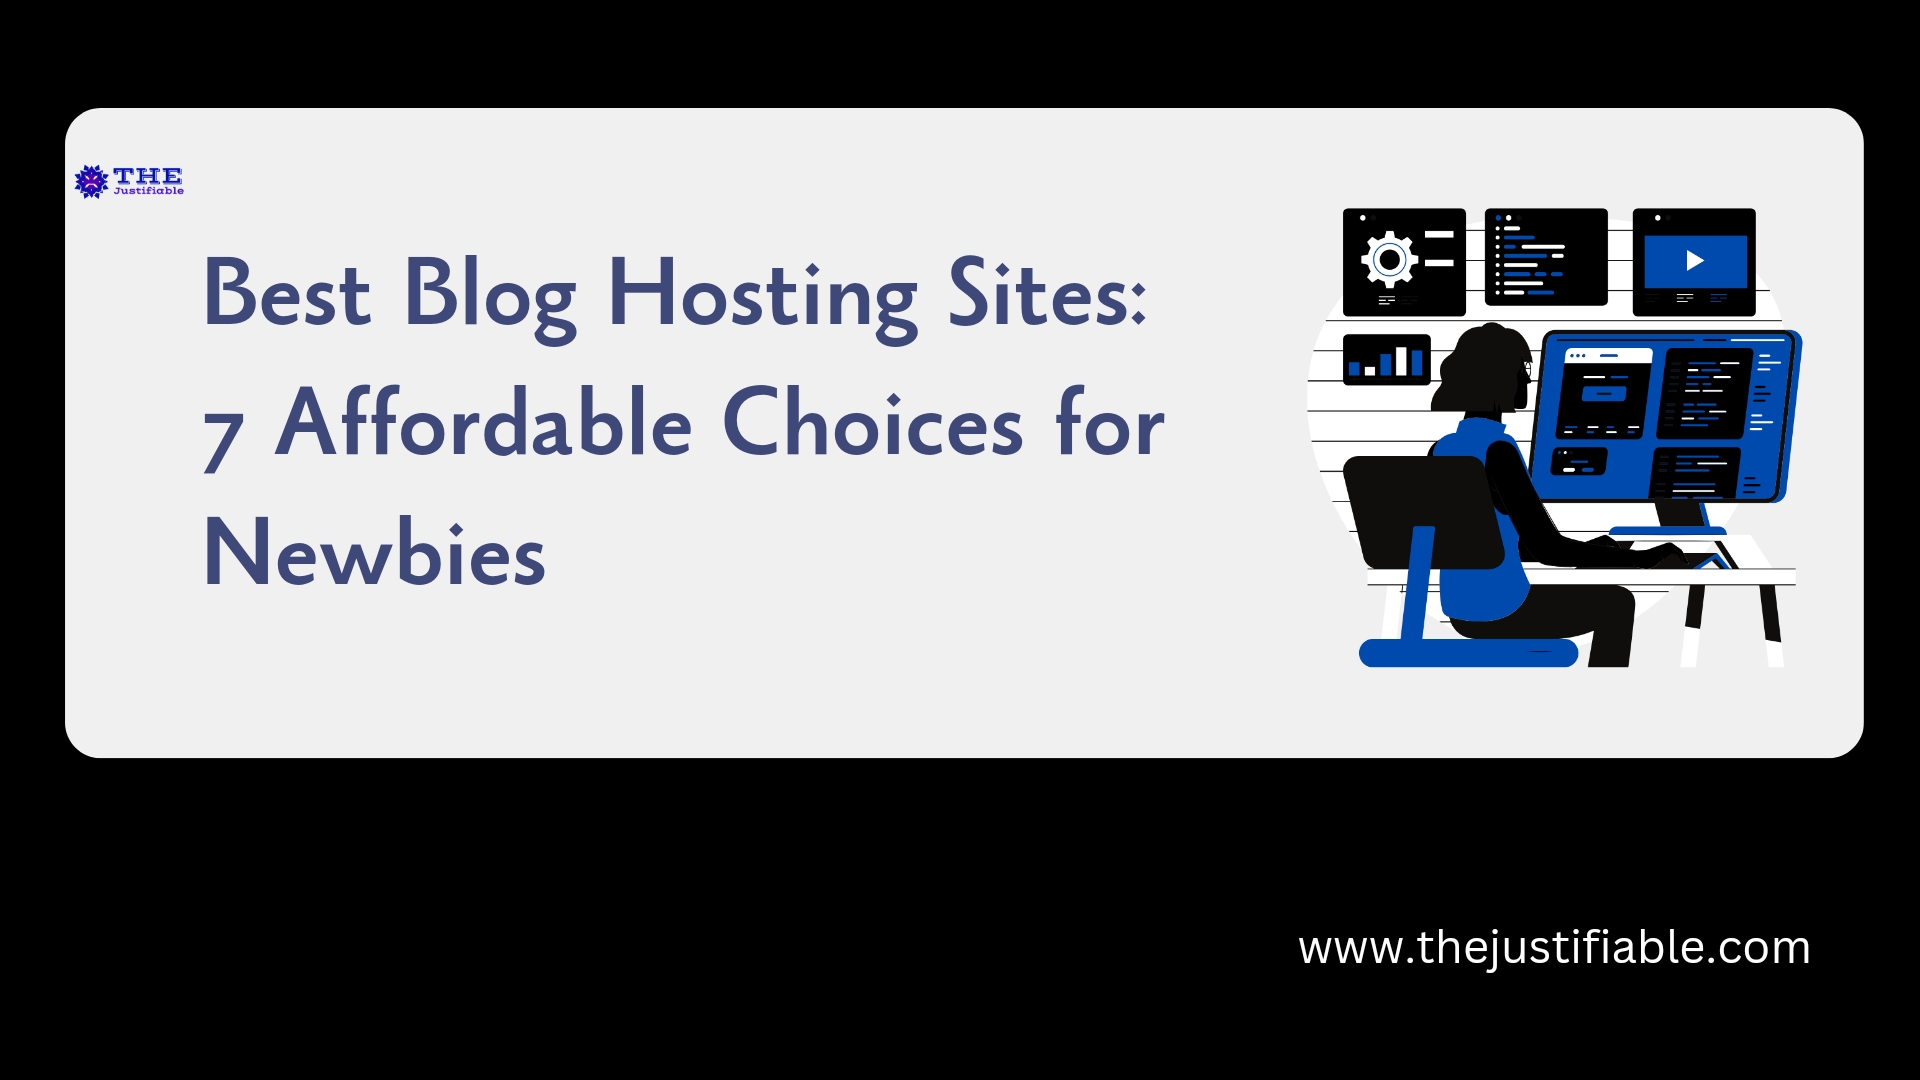 The image is a graphic related to best blog hosting sites.